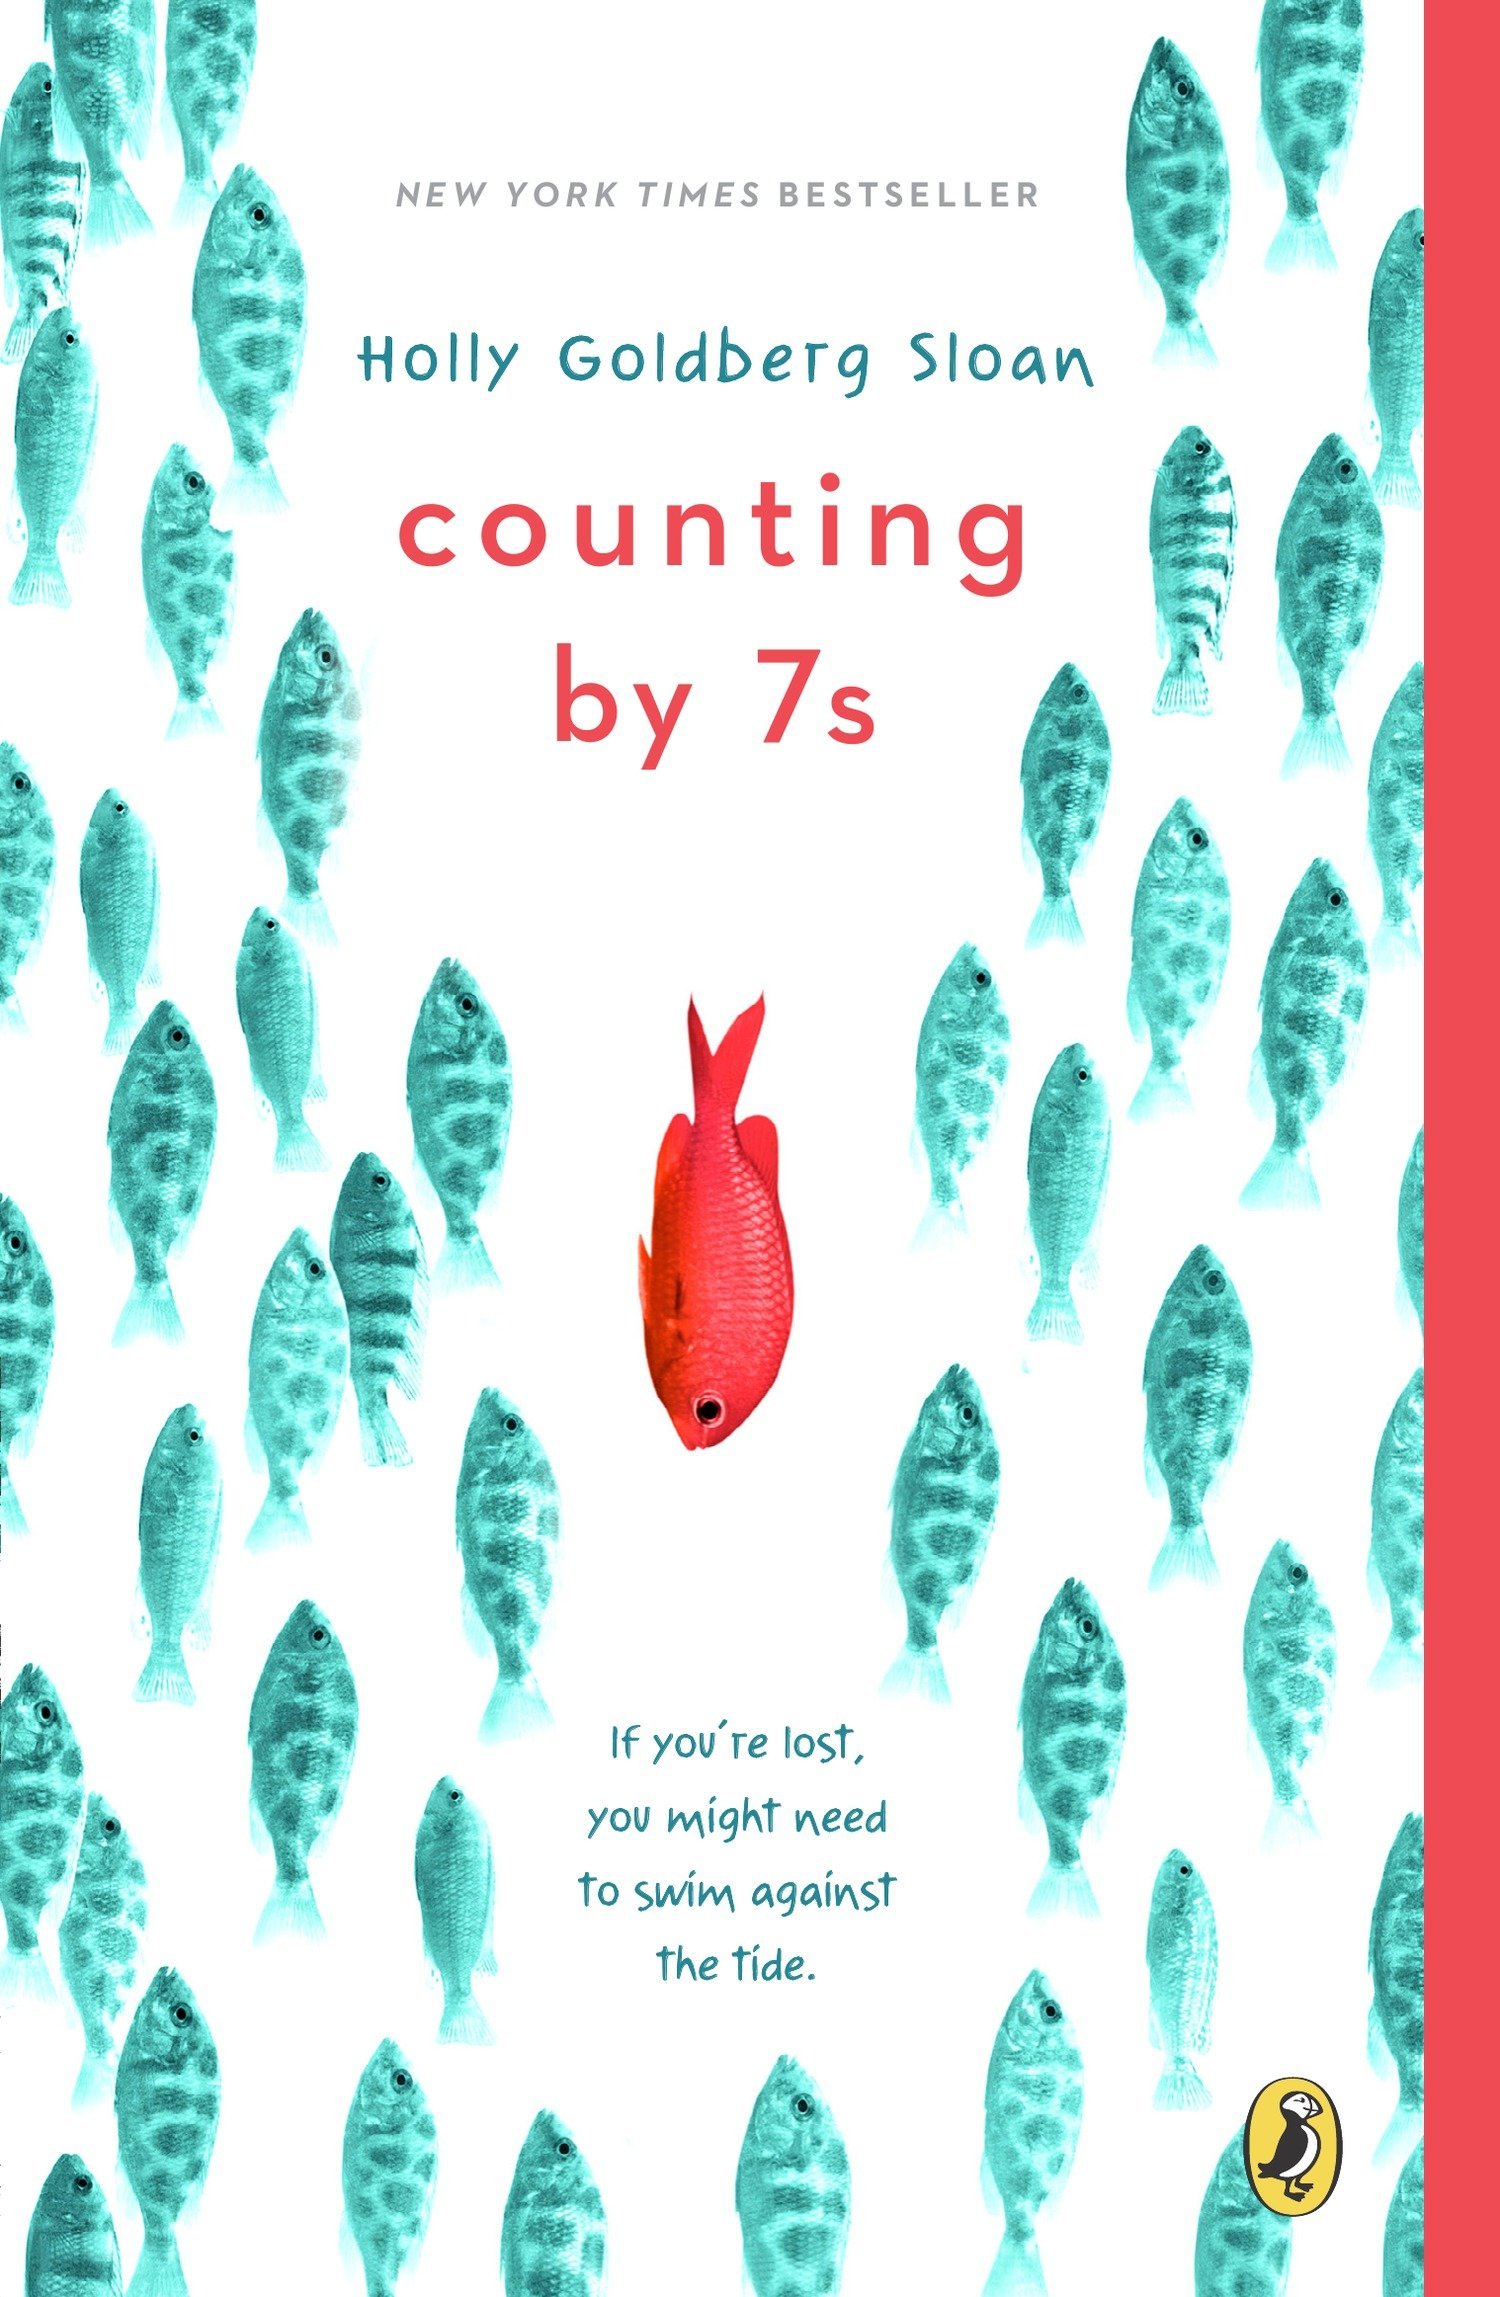 Cover of book Counting by Sevens, by Holly Goldberg Sloan, featuring a school of blue fish swimming up on a white background, while one red fish swims down in the middle